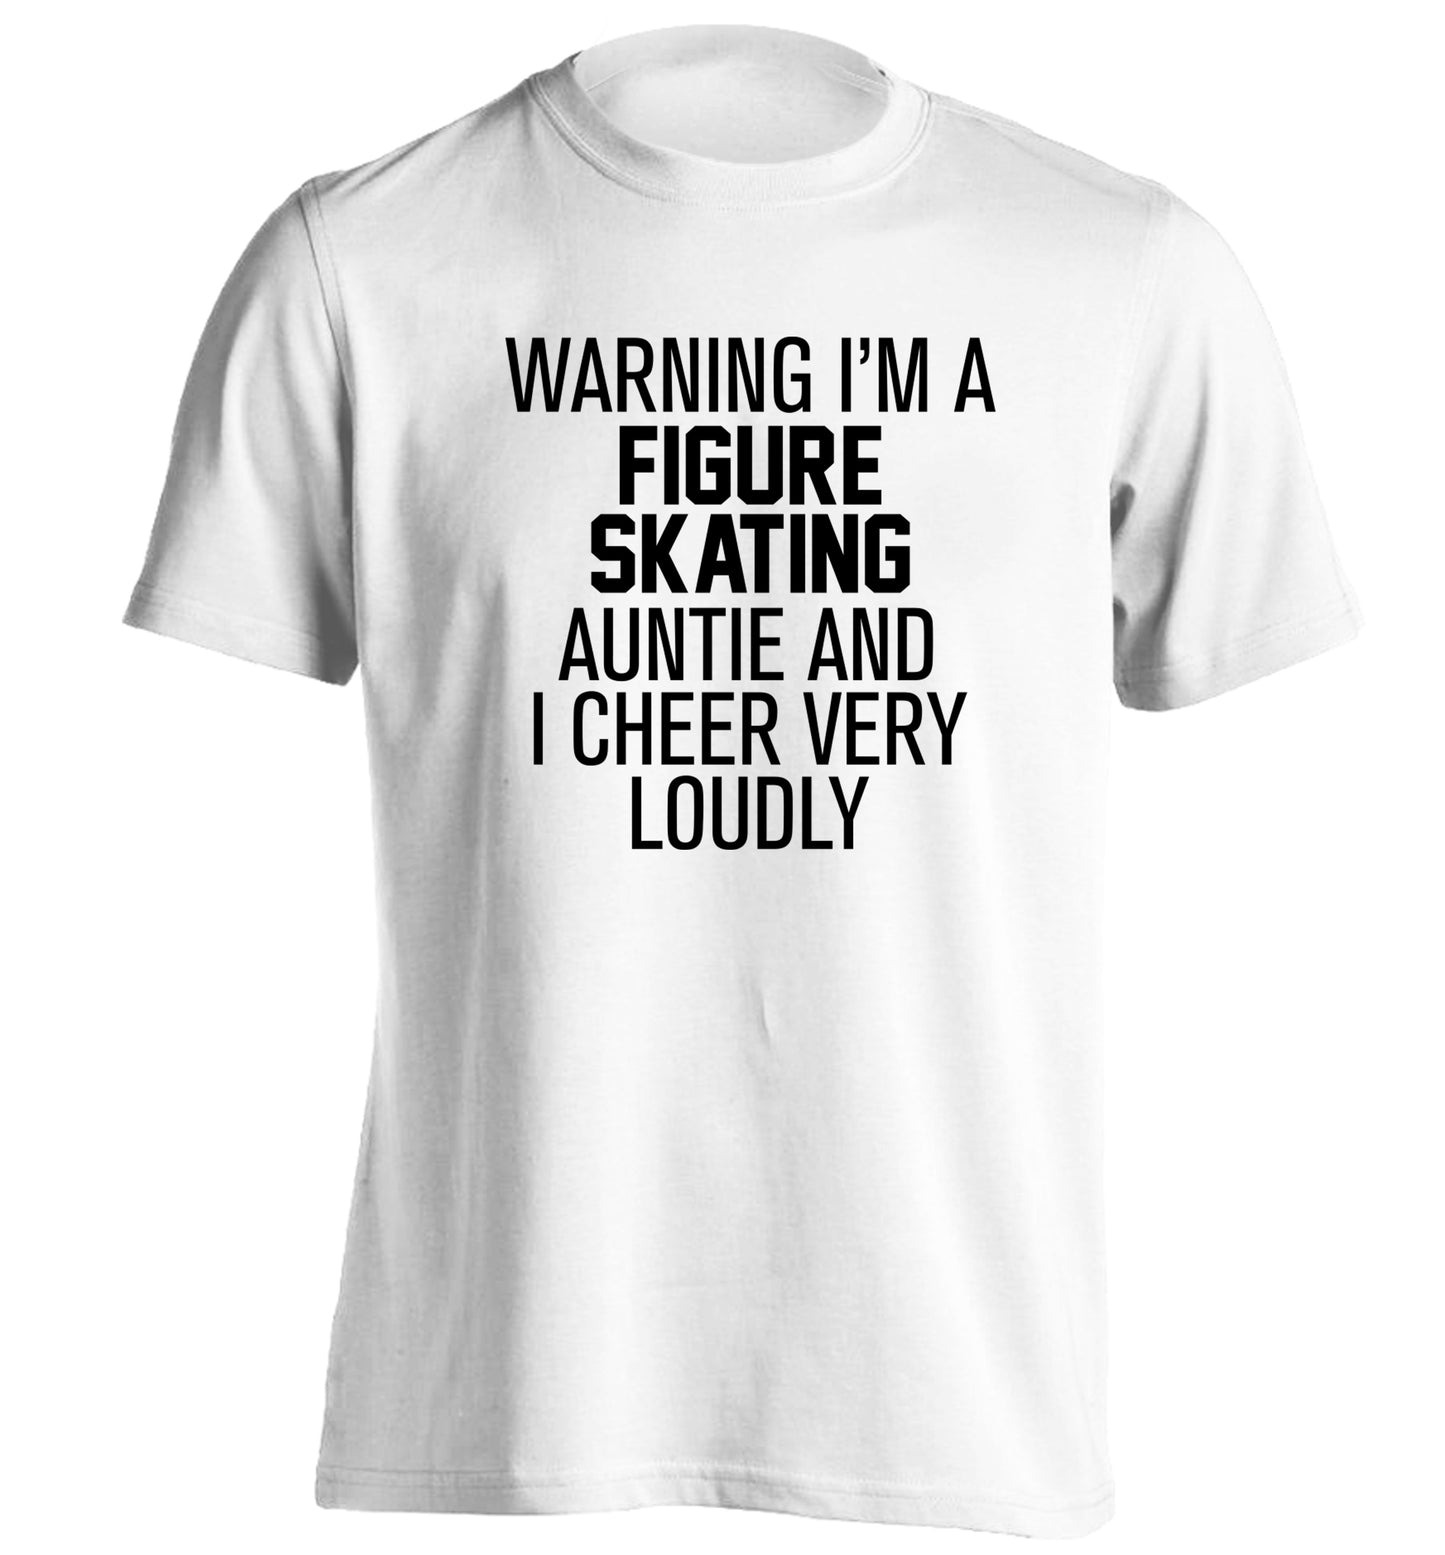 Warning I'm a figure skating auntie and I cheer very loudly adults unisexwhite Tshirt 2XL